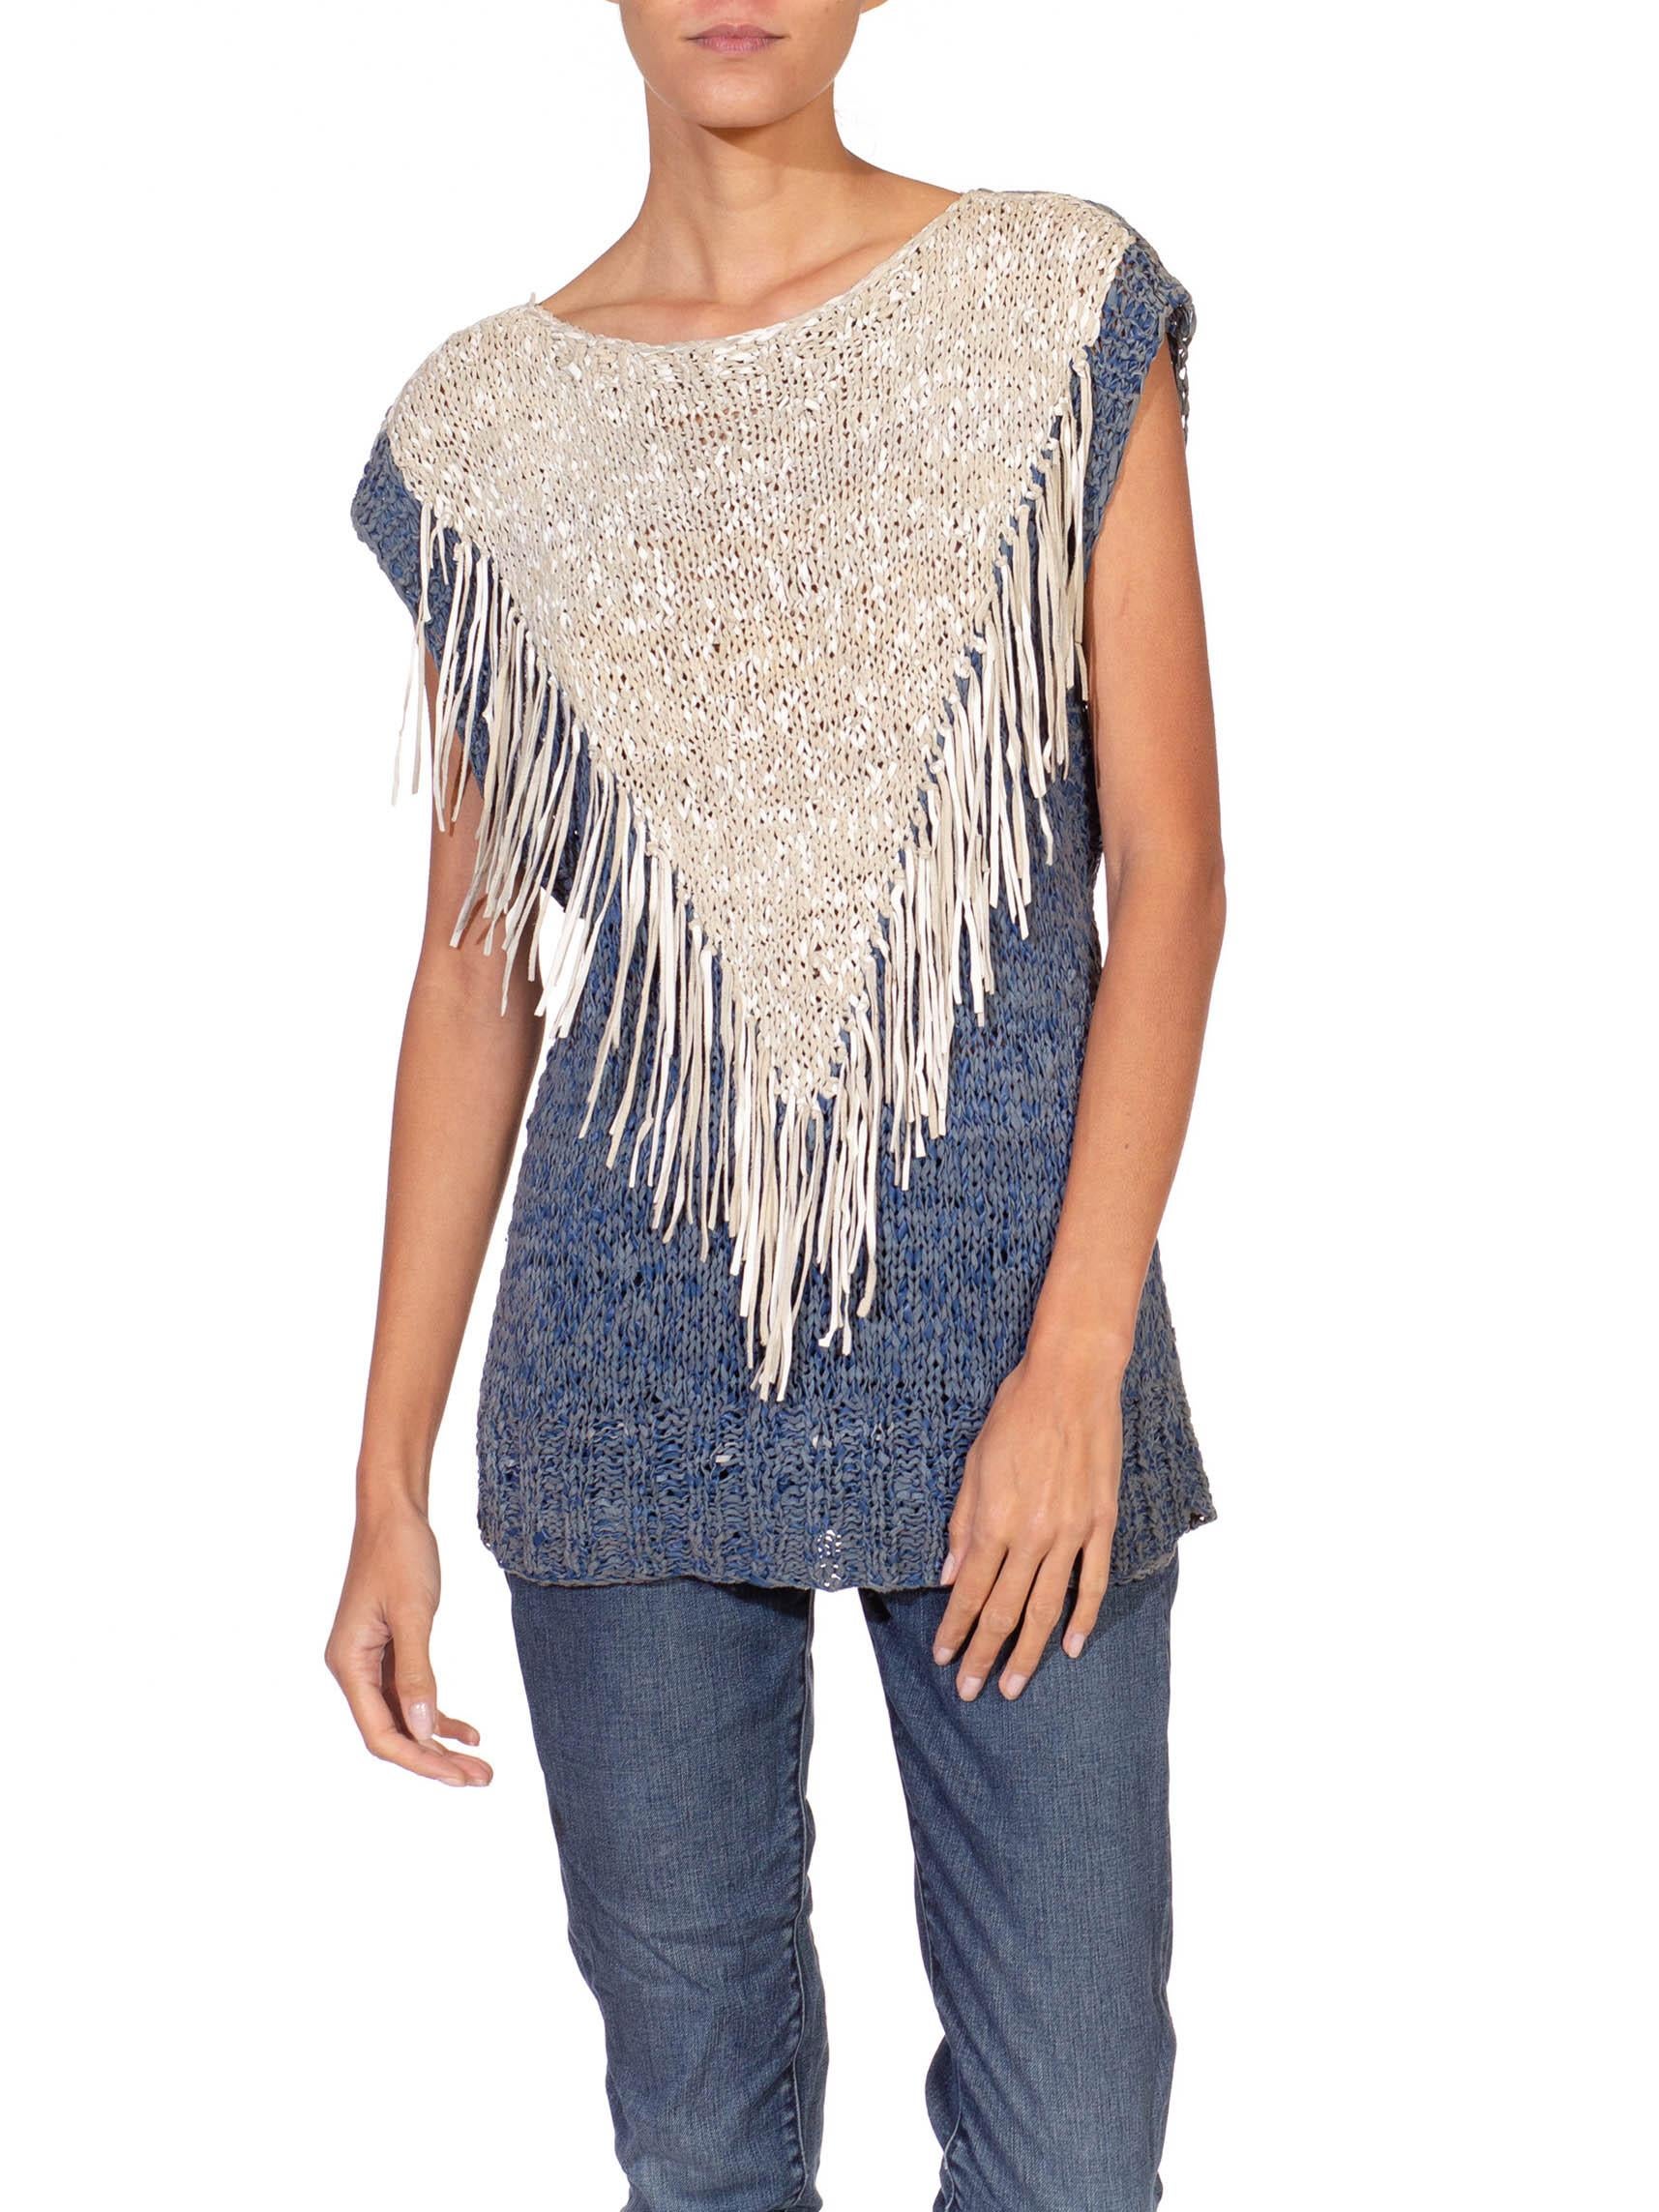 Women's 1970S Blue & White Suede Knit Leather Strips Top With Fringe For Sale